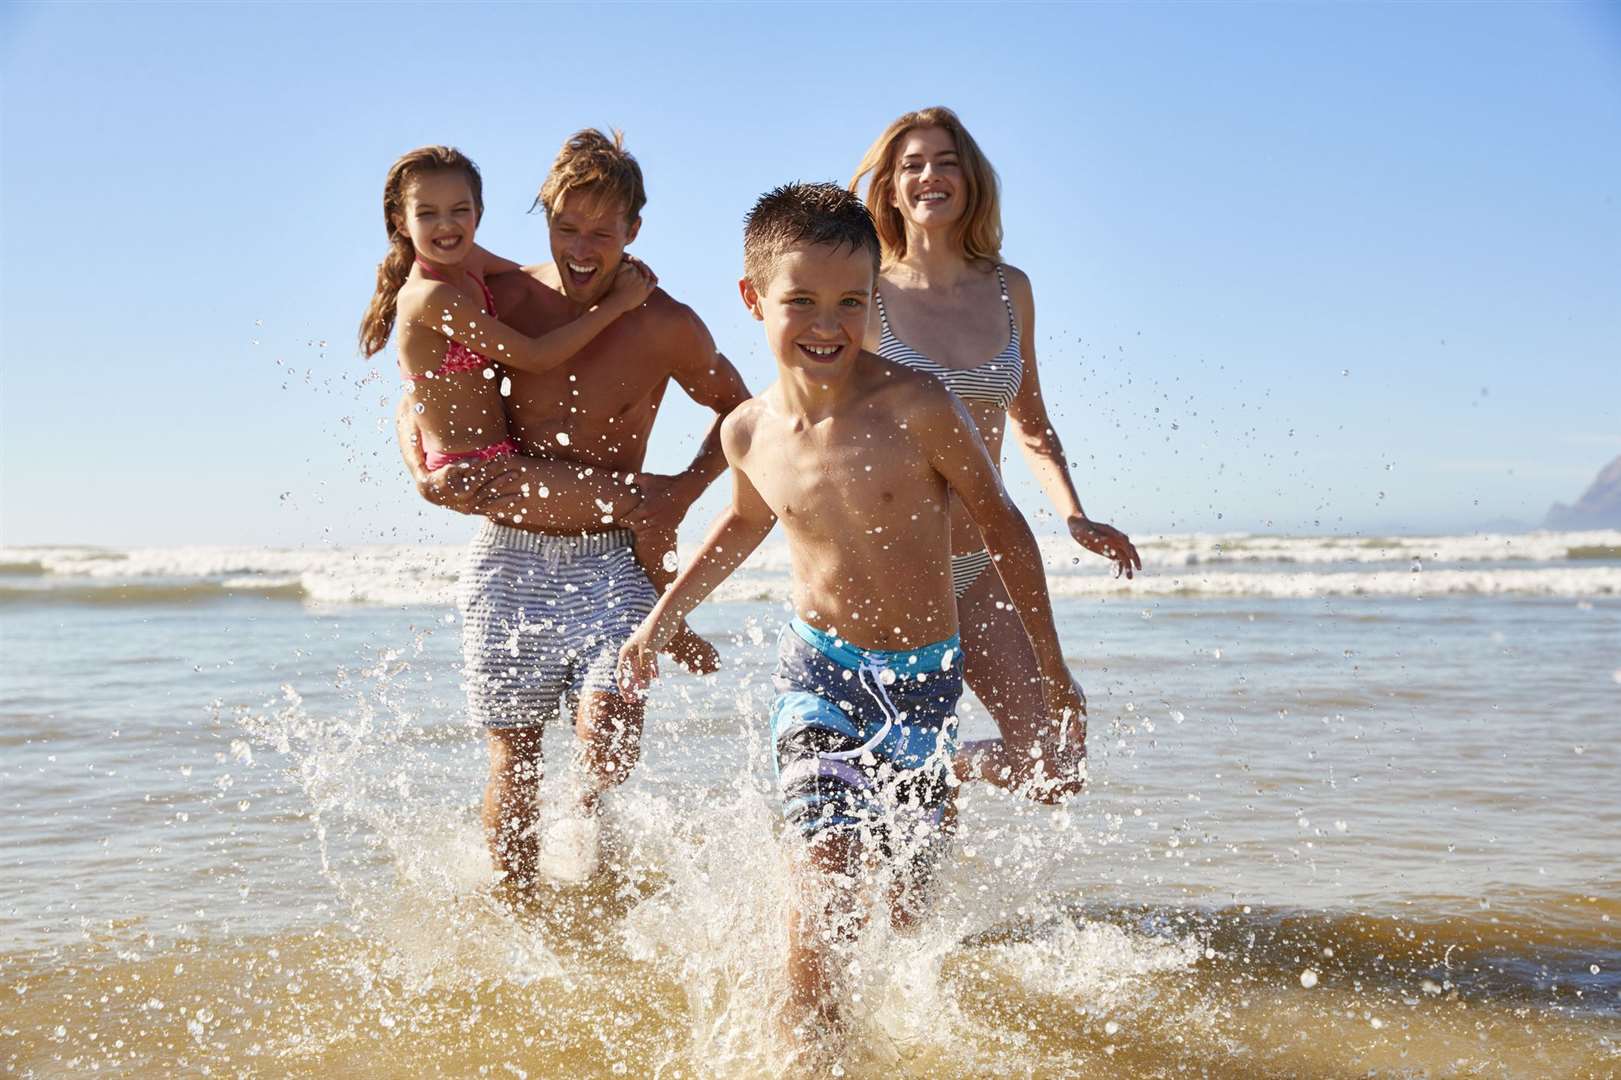 Where will you take the family for a beach day in Kent?